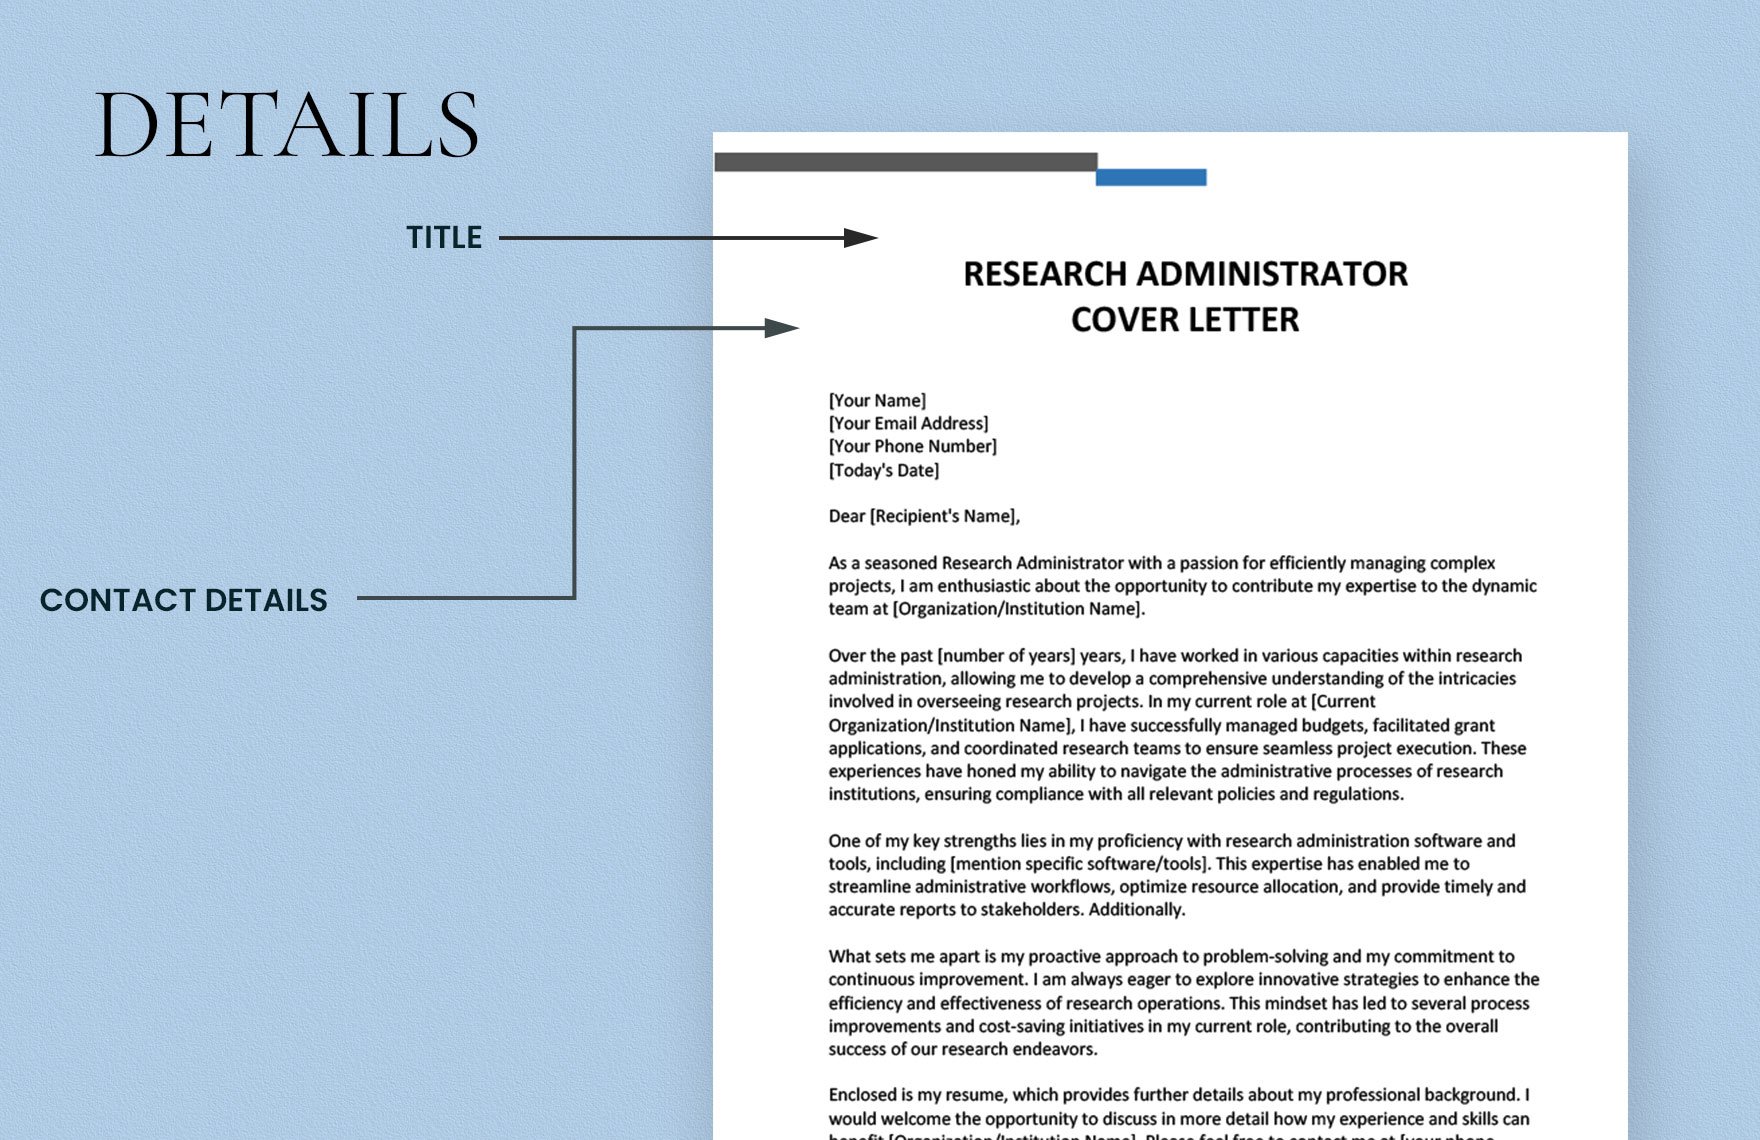 Research Administrator Cover Letter